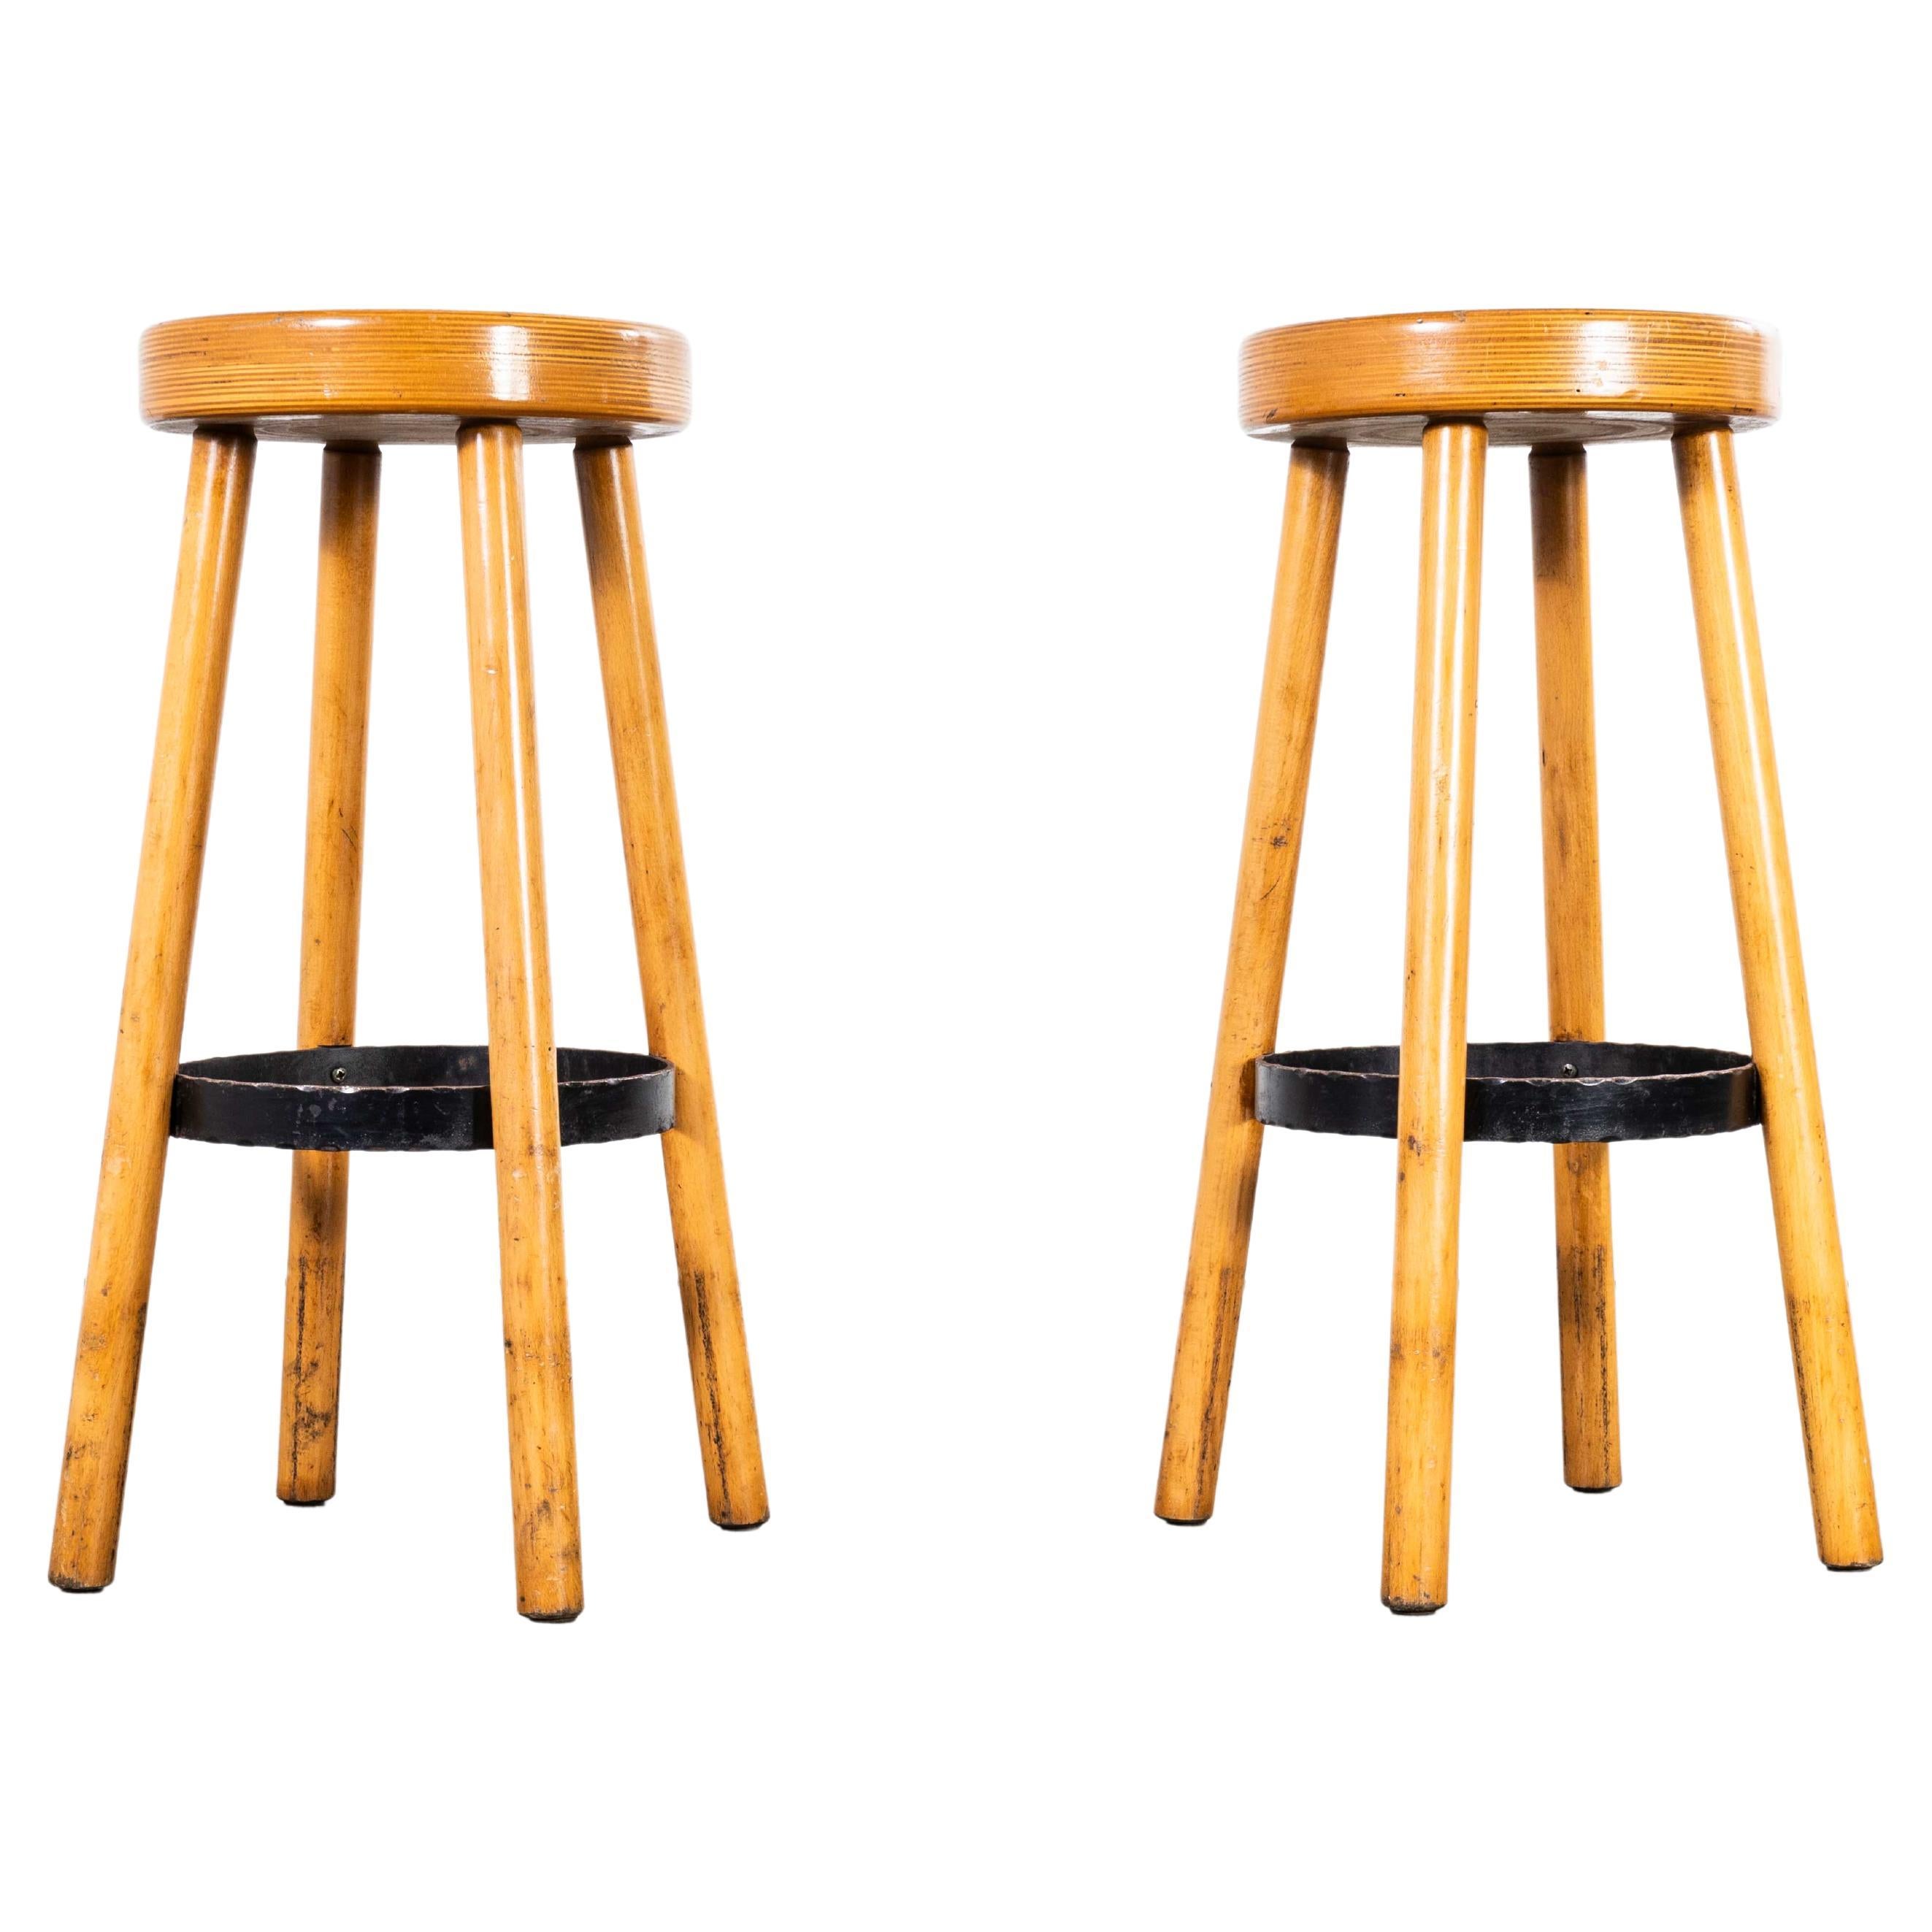 1960's French Pair Of Tall Bar Stools - Blonde